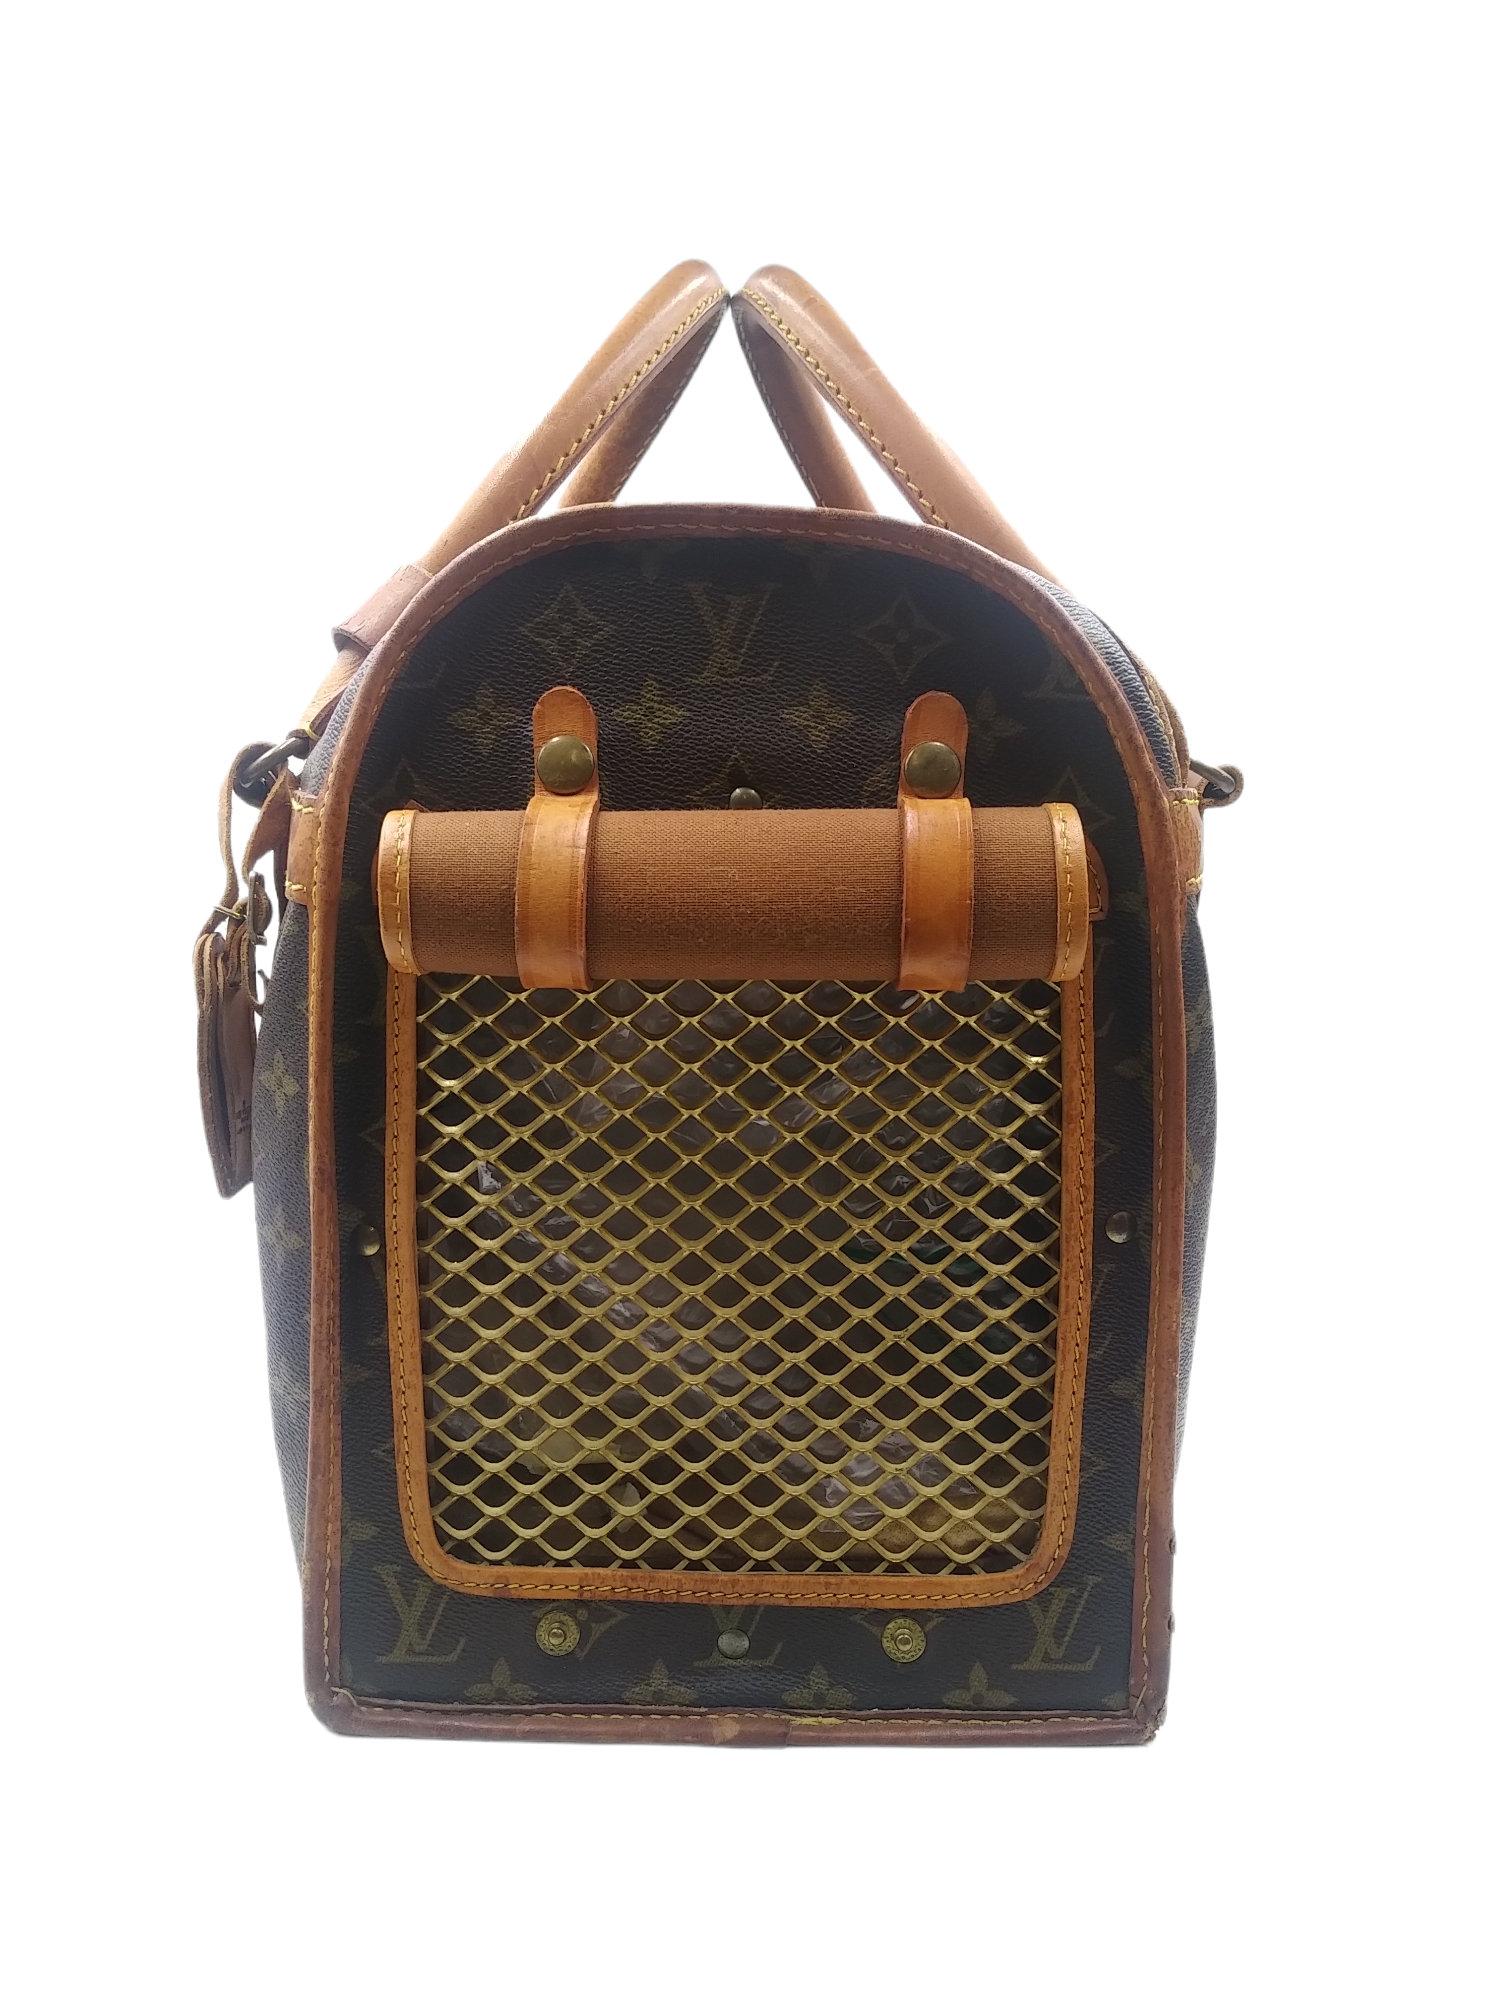 1980s Louis Vuitton Monogram Canvas Sac Chien 40 Dog Carrier
- 100% authentic Louis Vuitton
- Monogram coated canvas with leather trim
- Double rolled leather handles
- Two-way zip closure
- Hardware goldtone